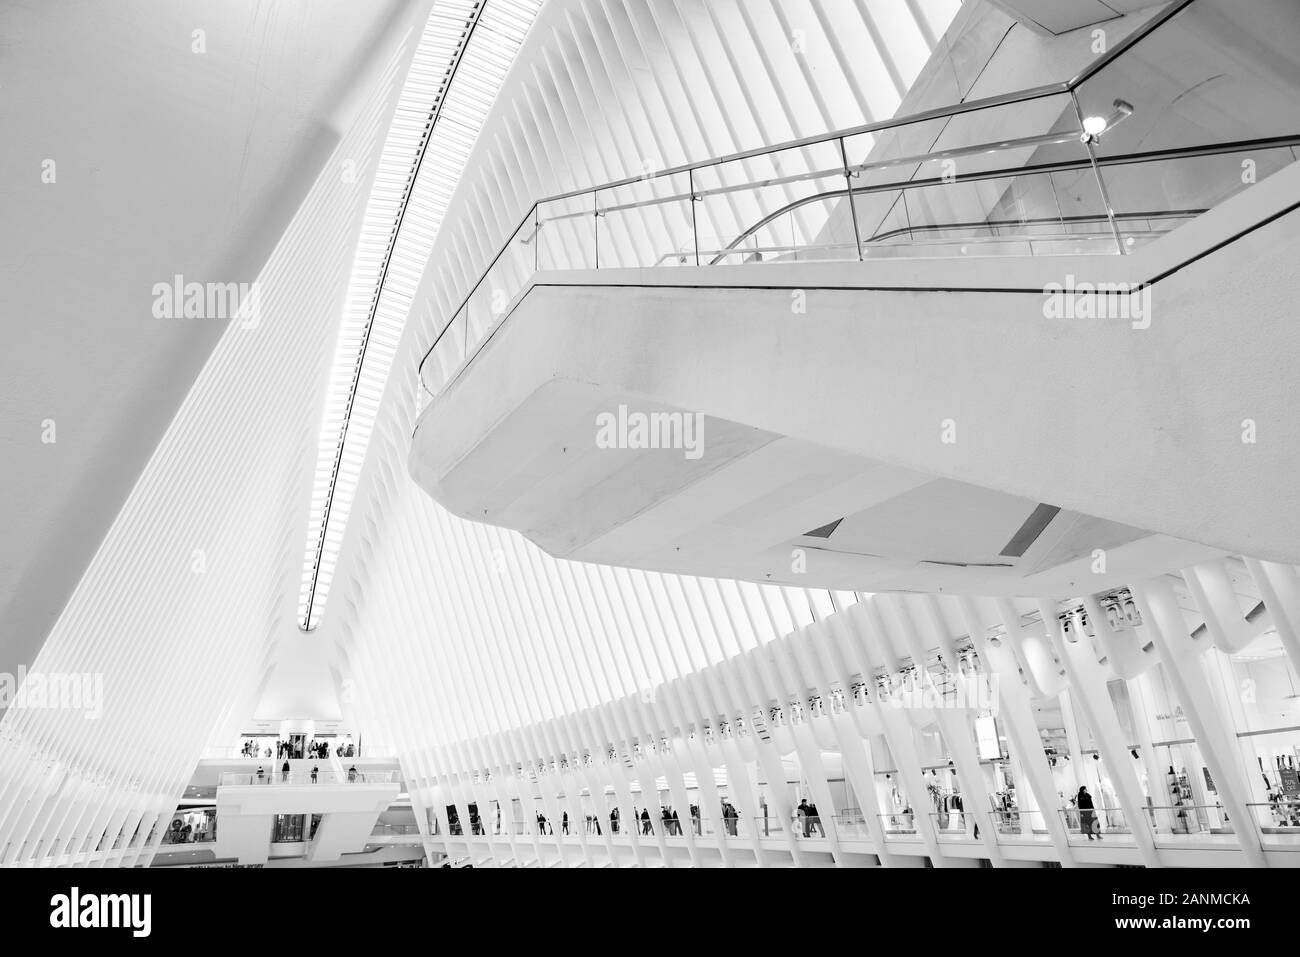 Black and White image of the Oculus, a memorial built after the destruction of the twin towers on 9/11. Stock Photo